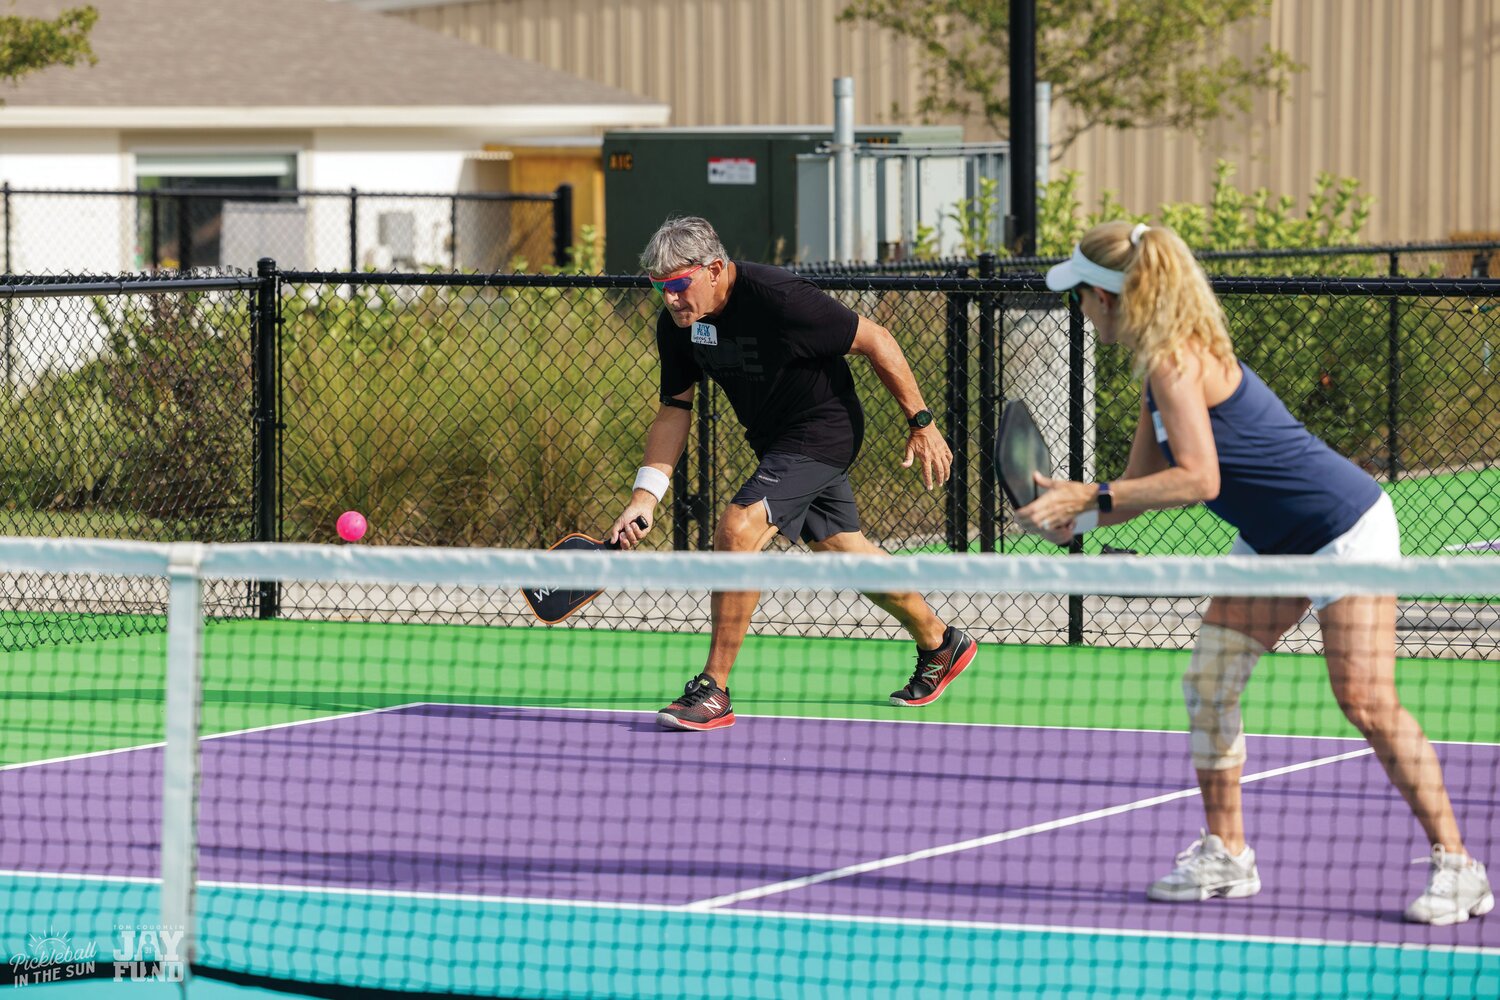 Pickleball is a game that can be enjoyed and played together regardless of age or experience level.